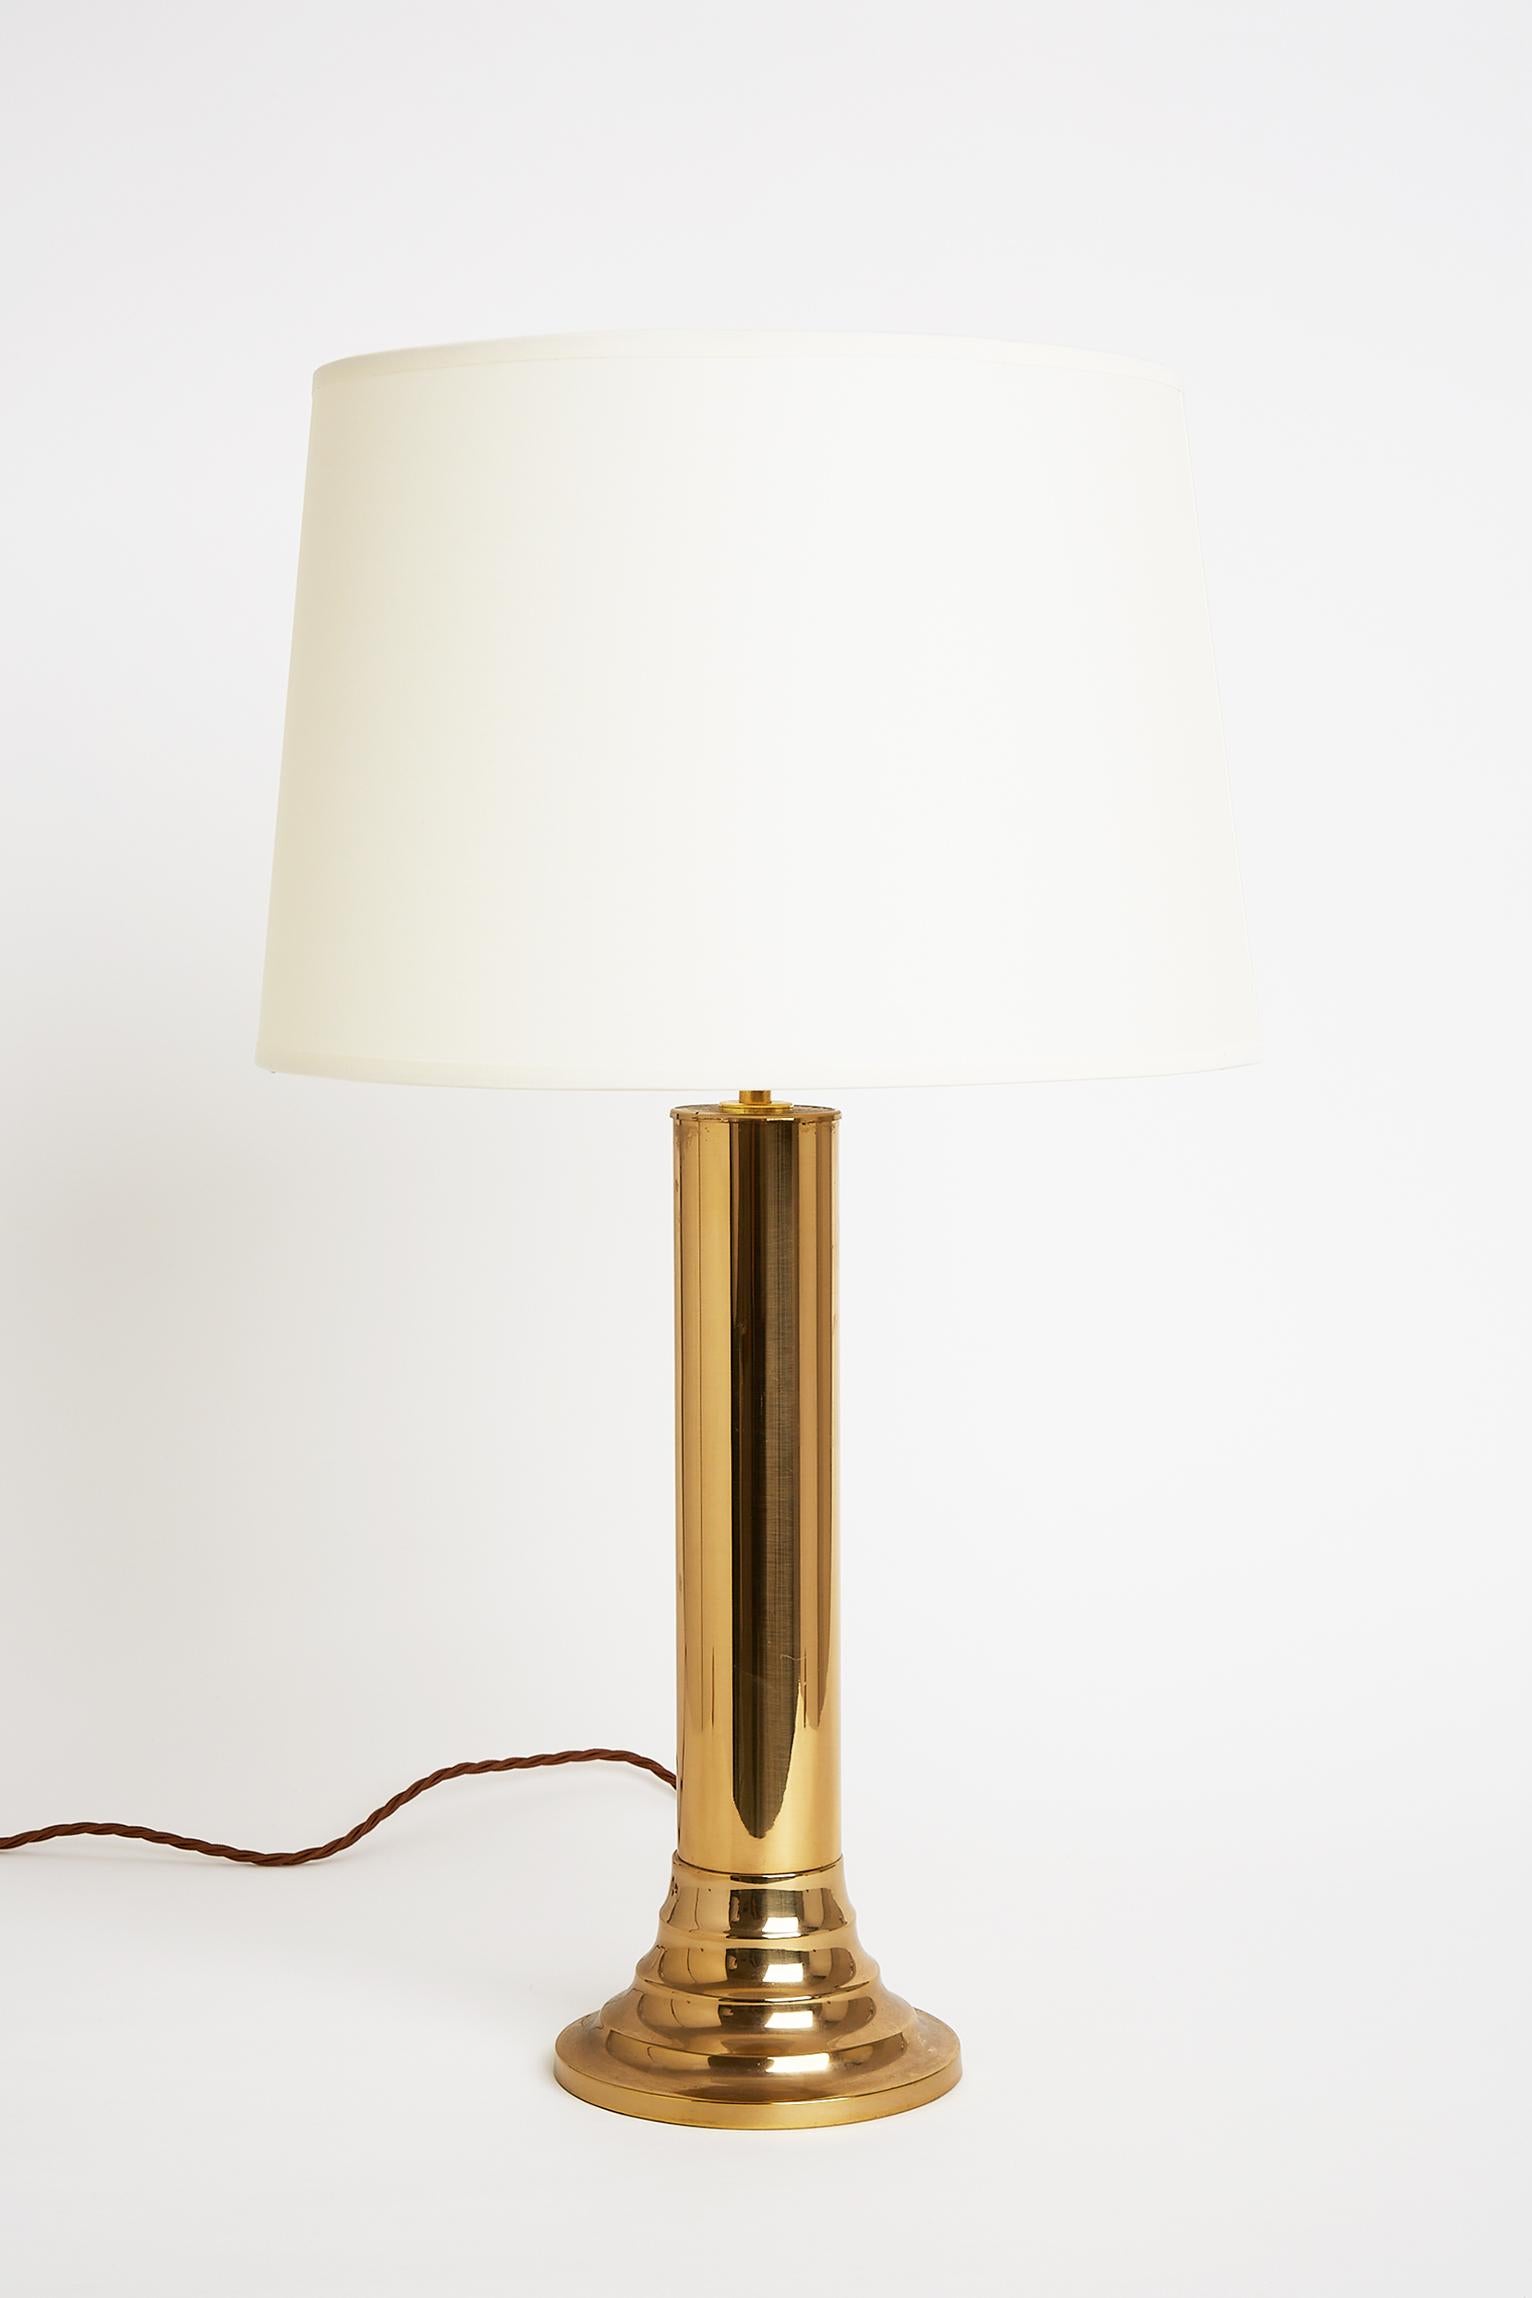 A pair of brass table lamps by Bergboms.
Bearing the maker's label.
Sweden, circa 1970.
With the shade: 63 cm tall by 36 cm diameter
Lamp base only: 42 cm tall by 14.5 cm diameter.
  